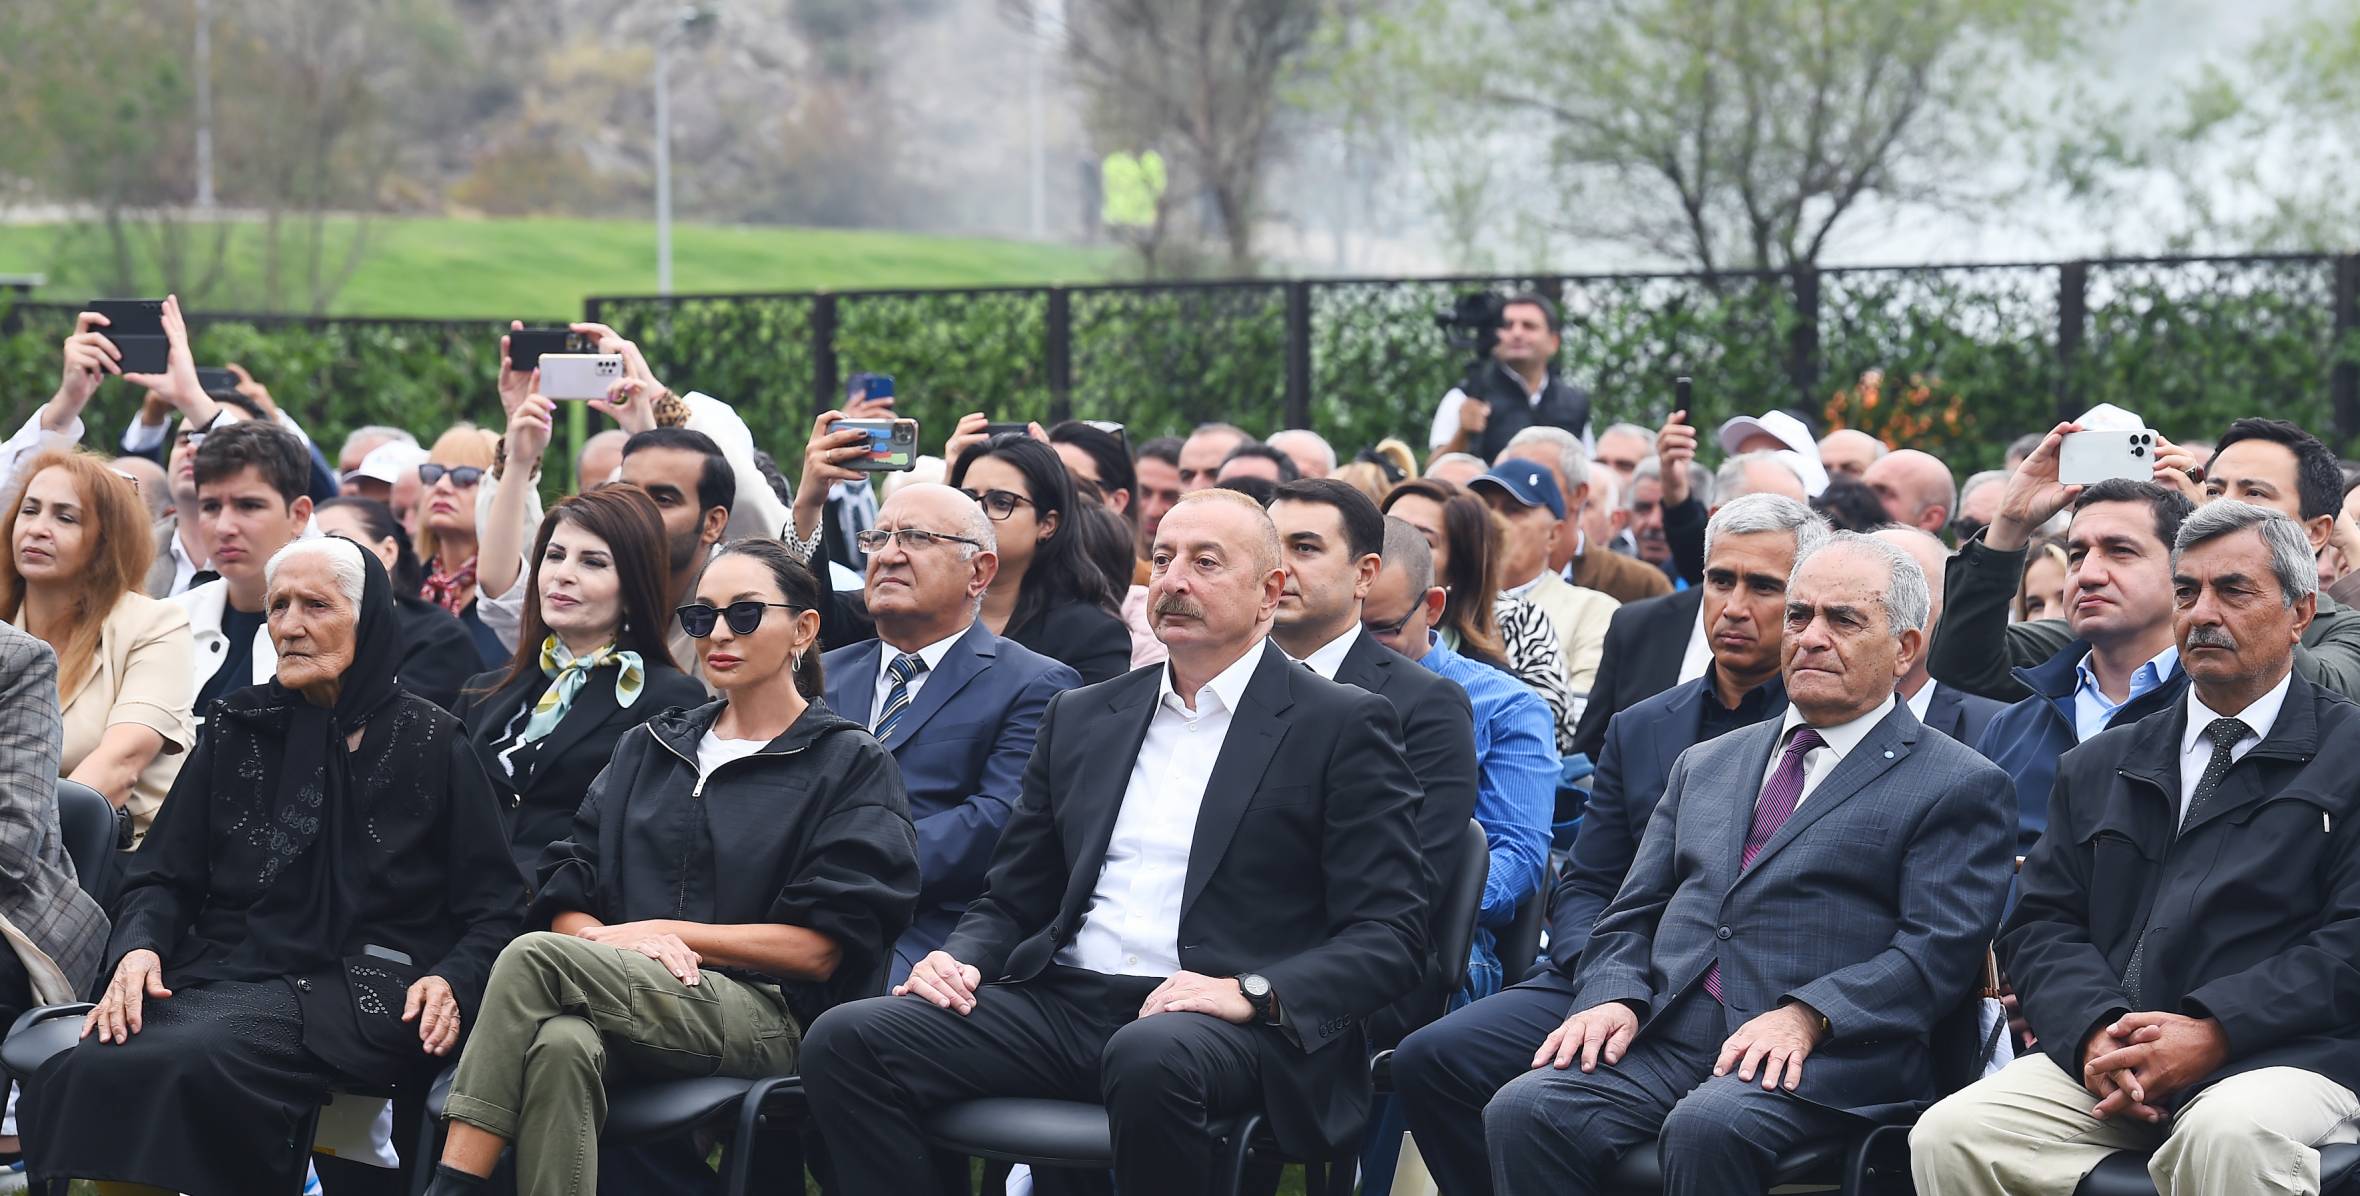 Ilham Aliyev and First Lady Mehriban Aliyeva participated in “Lachin City Day” festivities held on the bank of Hakari River